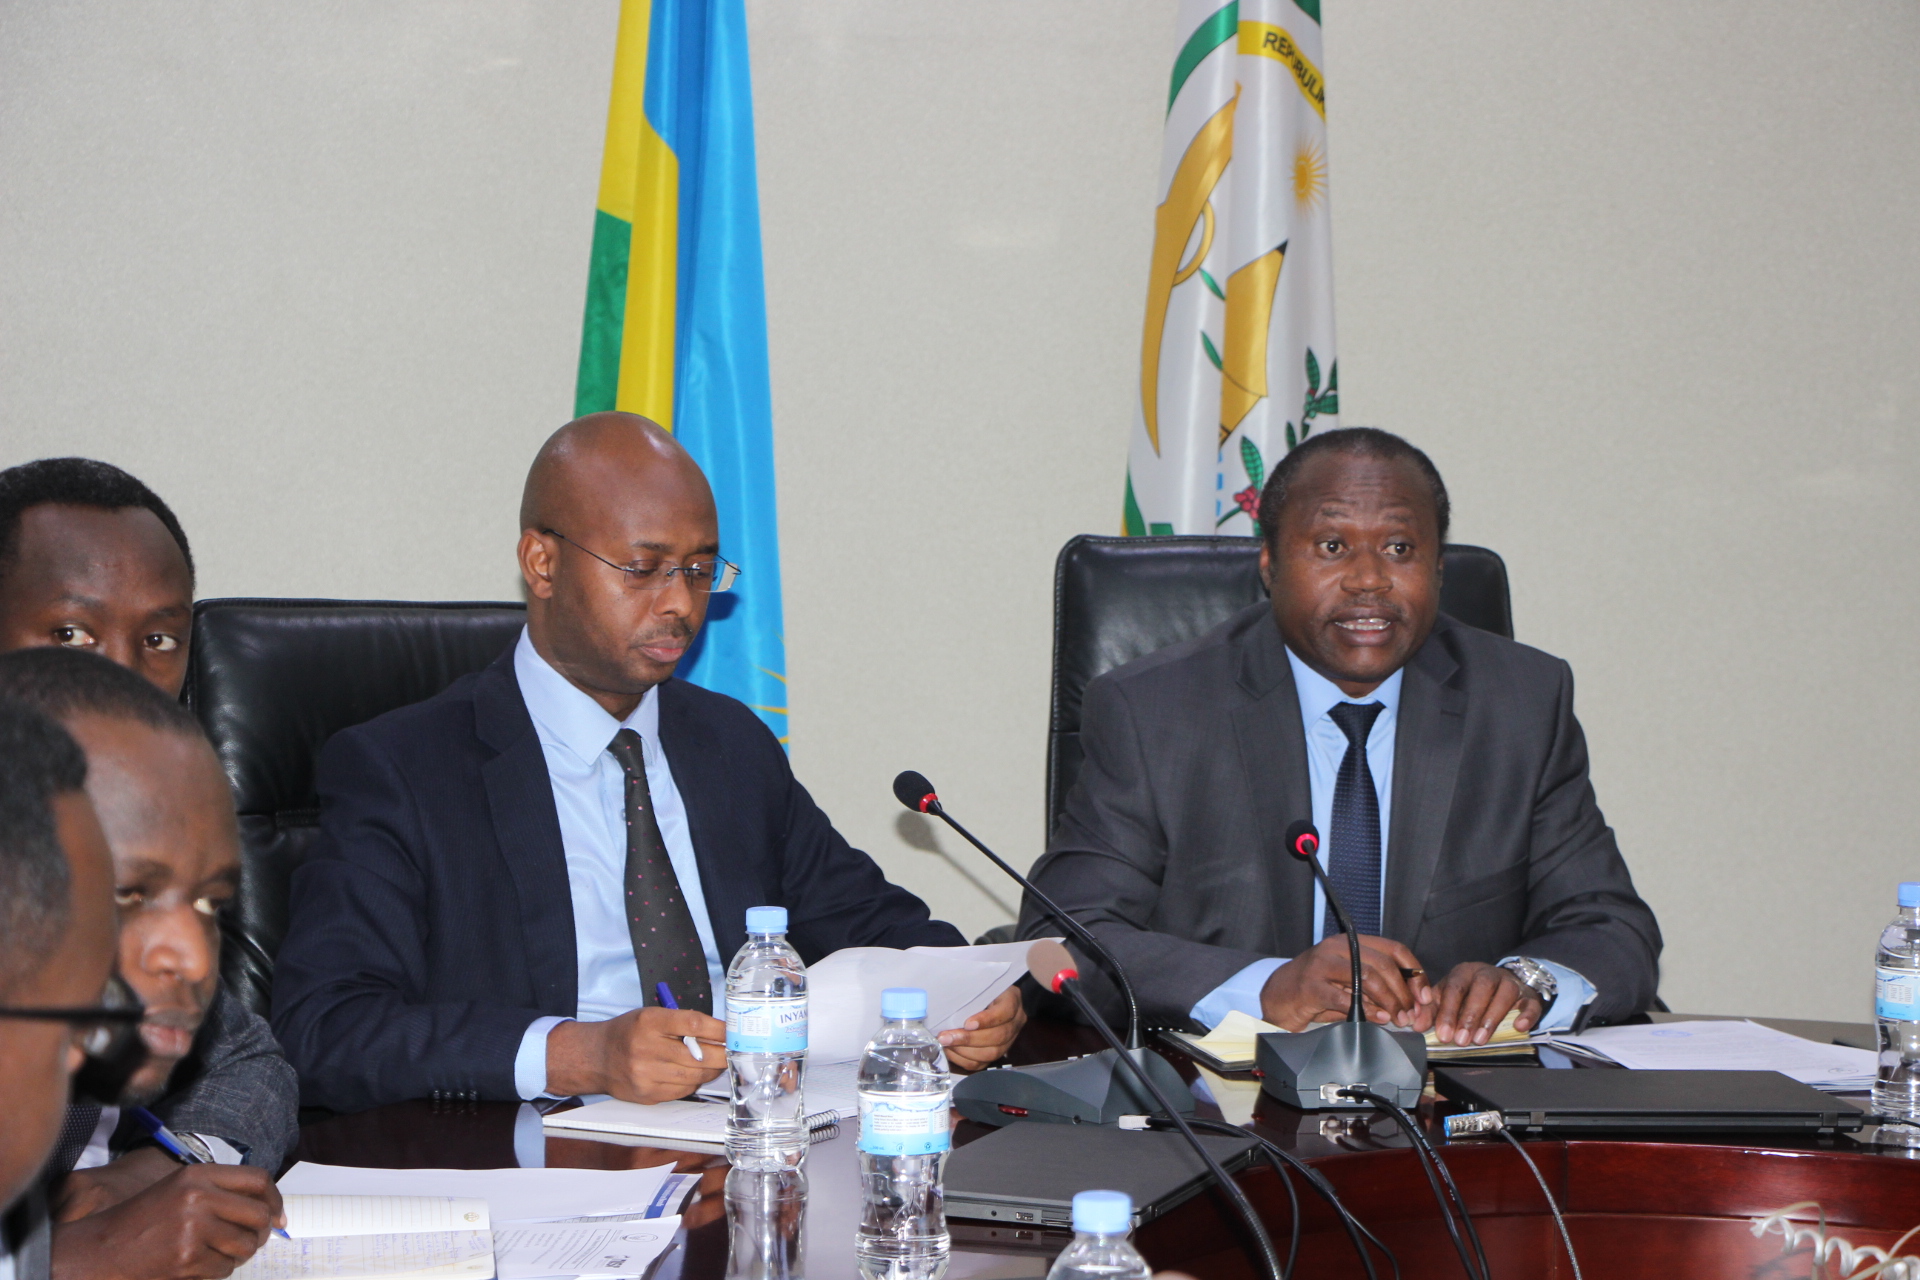 Dr Uzziel Ndagijimana, Minister of Finance and Economic Planning (R) explains how Rwandau2019s economy grew by 8.6 per cent in 2018 as the Director General of the National Institute of Statistics of Rwanda, Yusuf Murangwa (L) looking on. / Courtesy